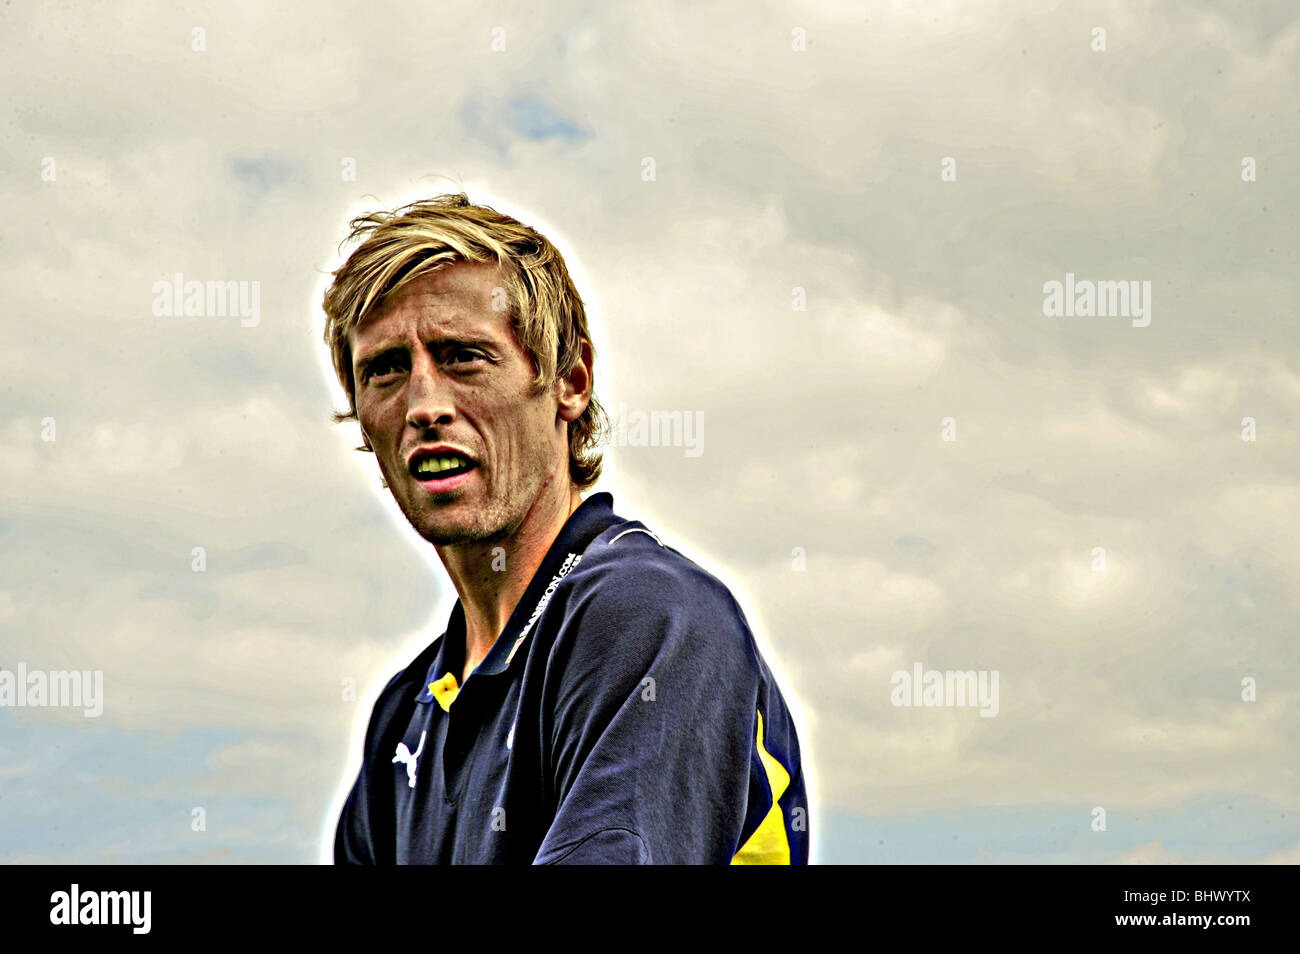 Peter Crouch Tottenham Hotspur football player, new signing pictured August 2009. Stock Photo